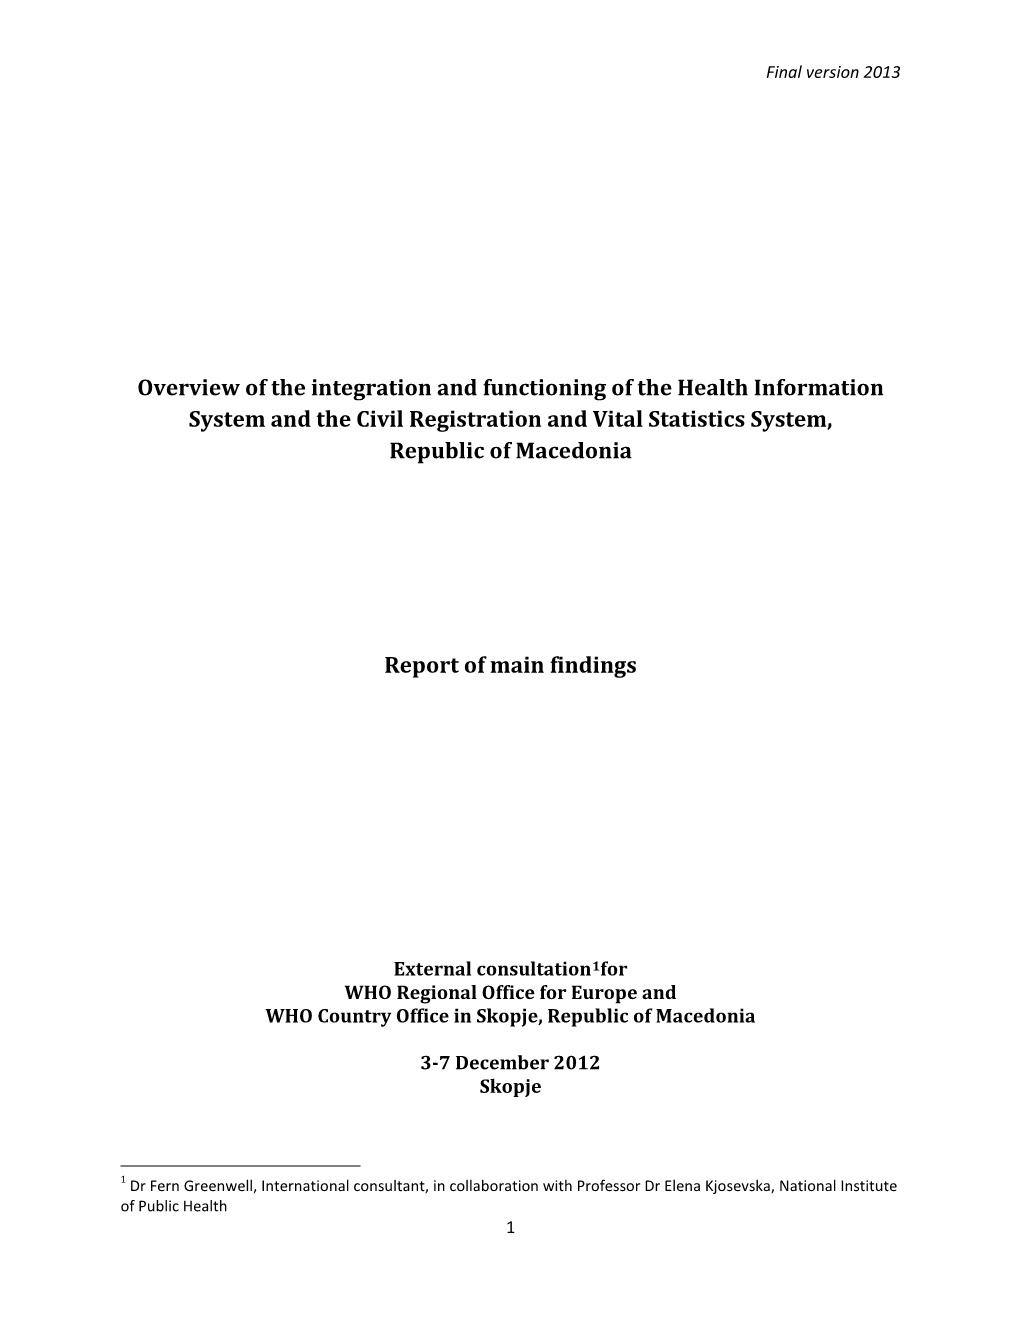 Overview of the Integration and Functioning of the Health Information System and the Civil Registration and Vital Statistics System, Republic of Macedonia